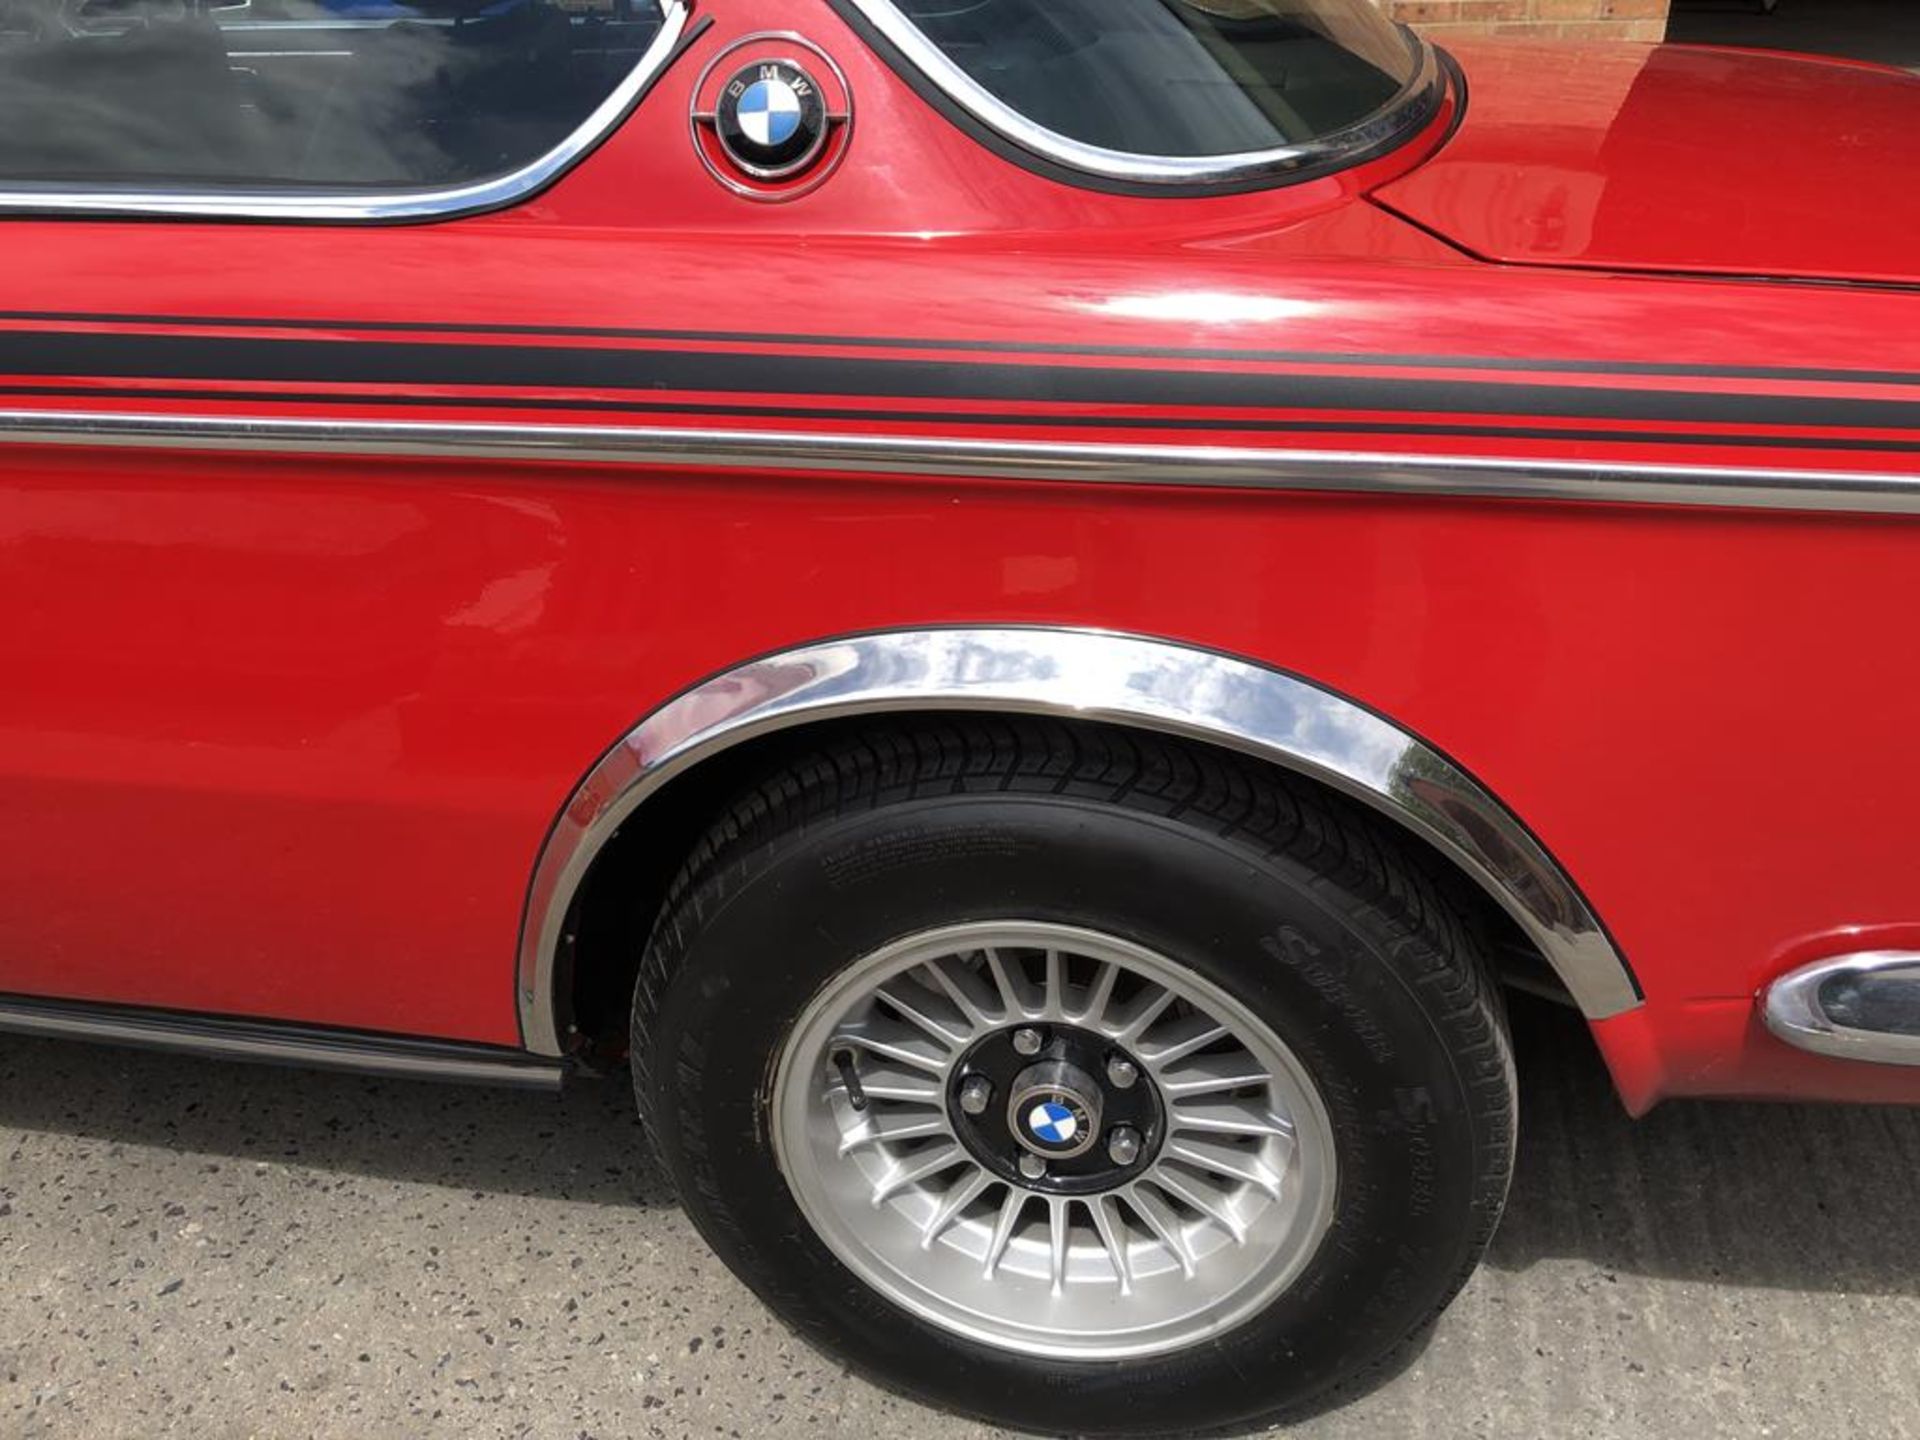 1974 BMW 3.0 CSL Registration number PAK 2M Chassis number 2285402 Verona red with a black - Image 69 of 137